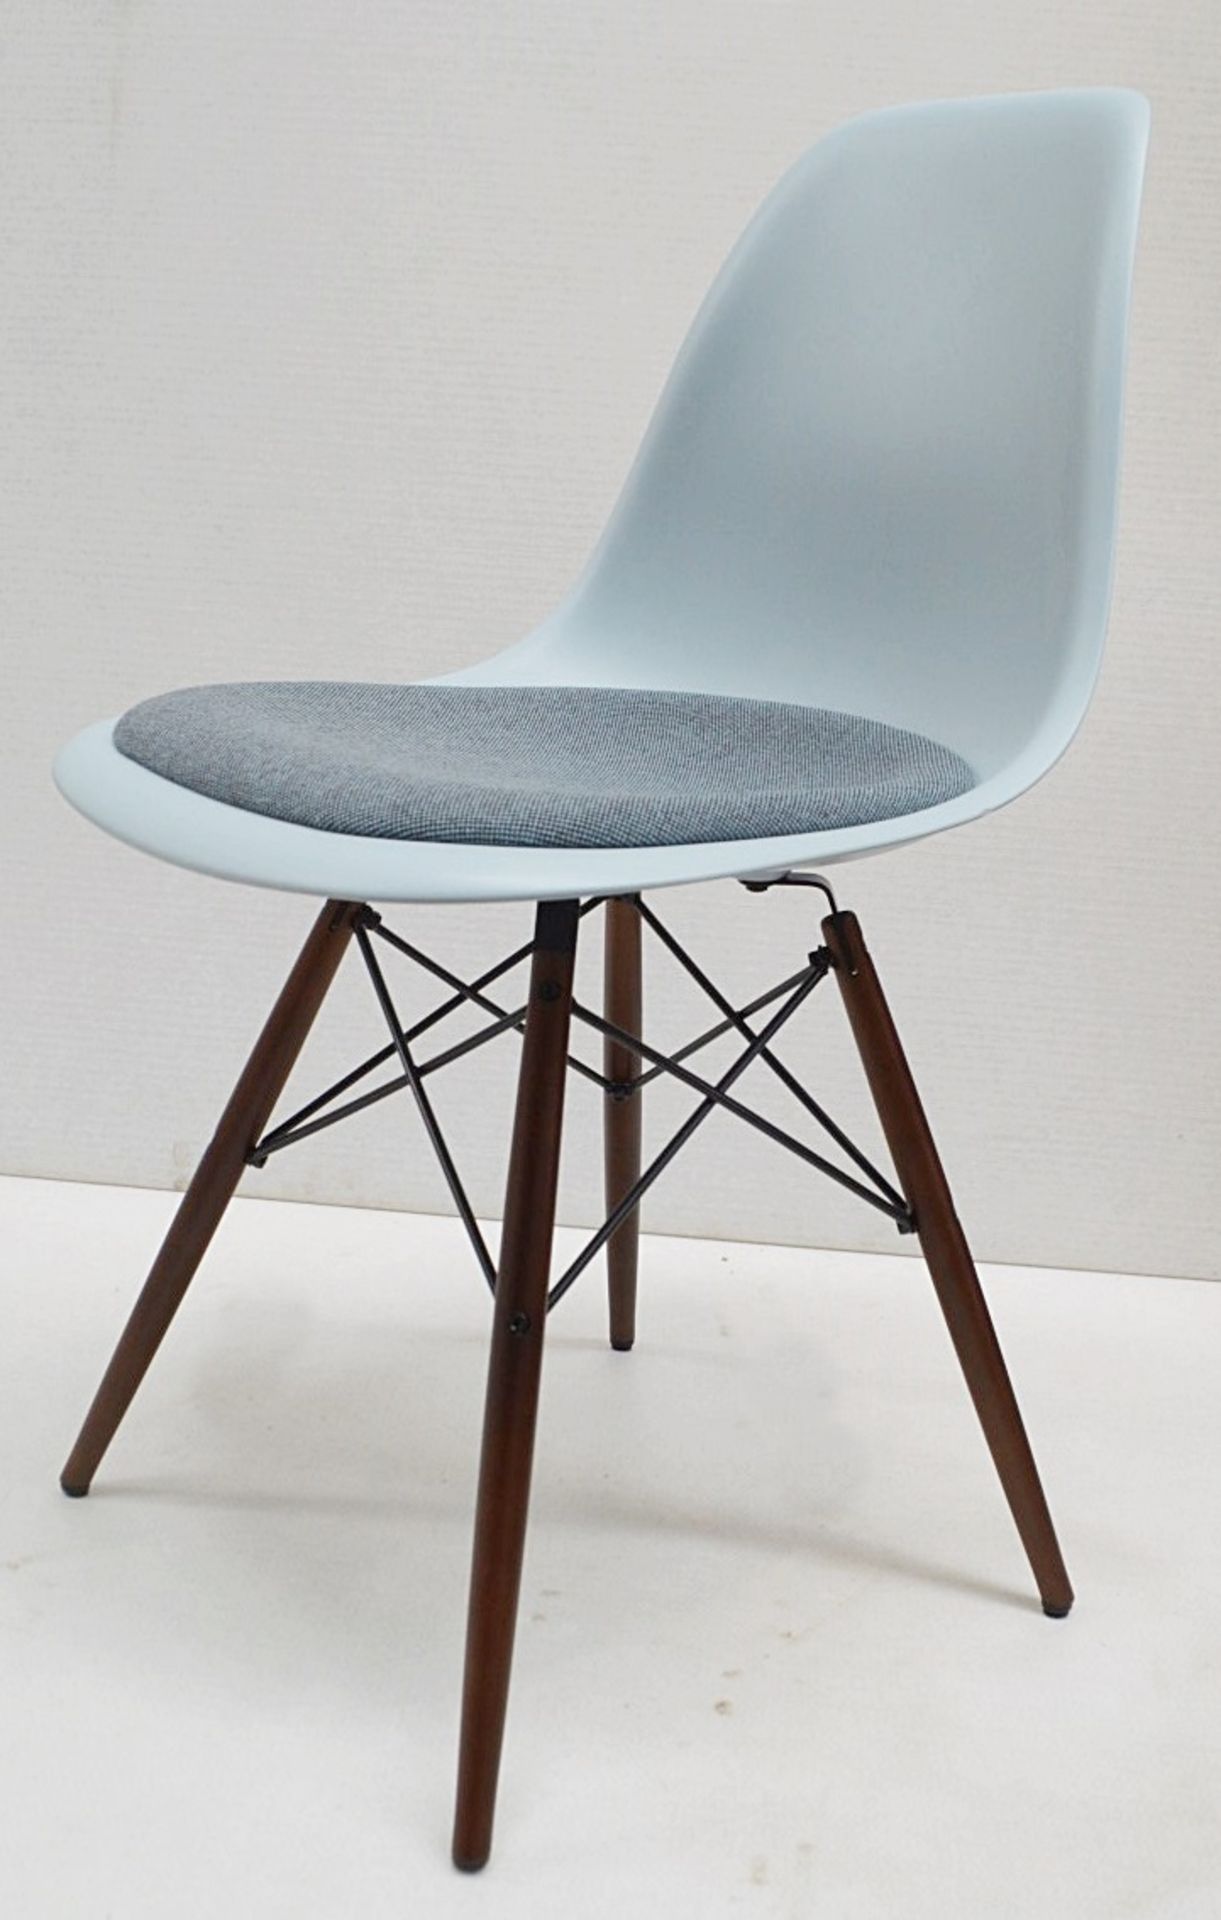 1 x VITRA Eames DSW Designer Chair With Upholsted Seat And Maple Base In A Dark Stain - Image 8 of 9